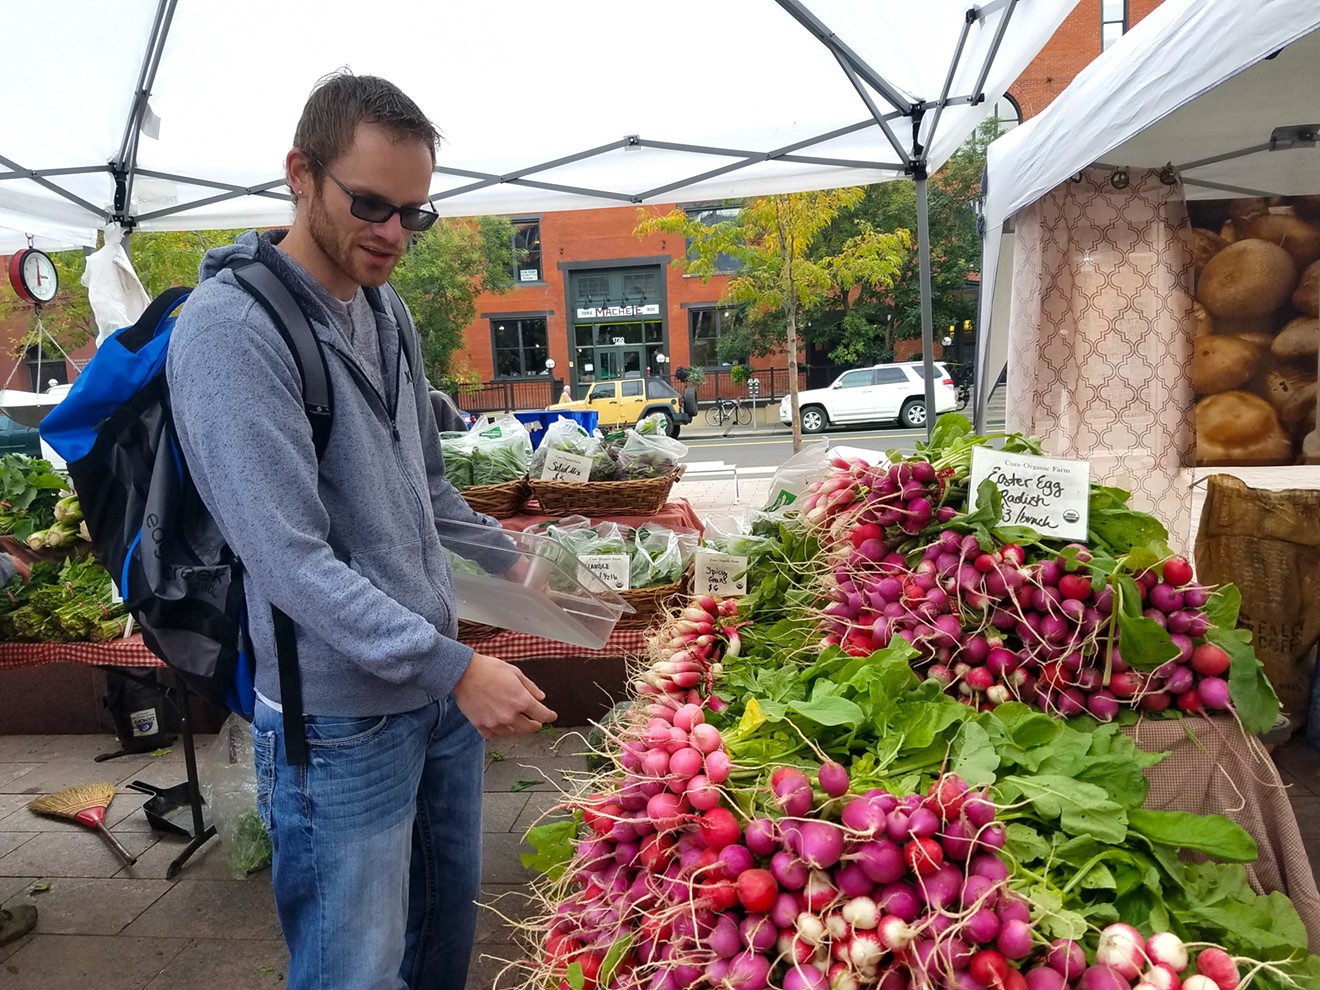 Chef Bradley Yard of Avelina shops for radishes at the Cure Organic Farm stand at the Union Station Farmers' Market.